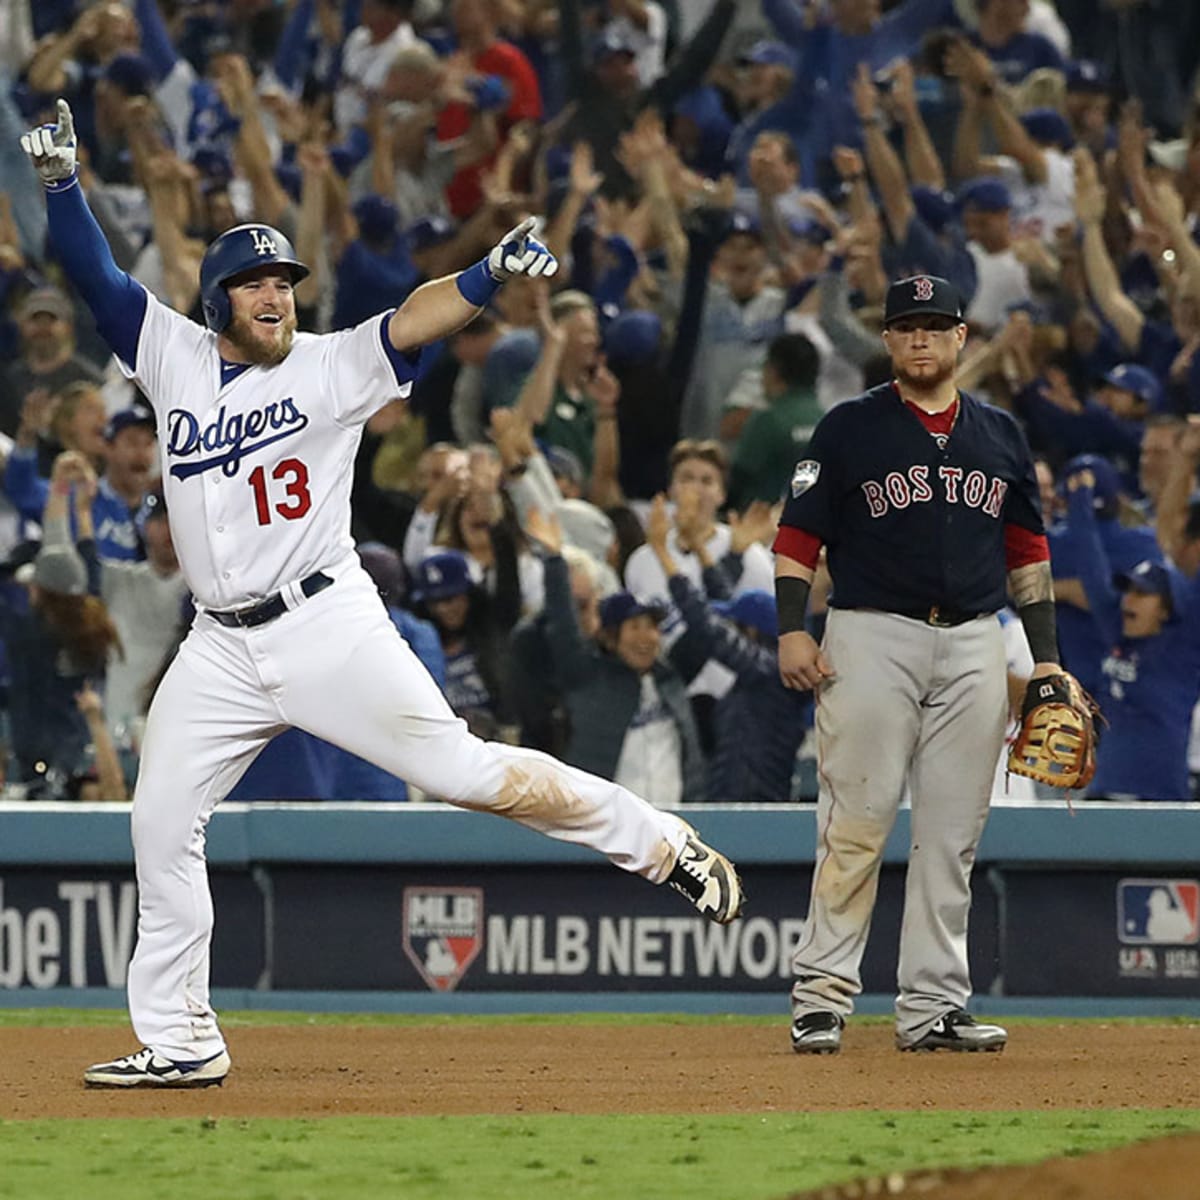 Red Sox, Dodgers gear up for what should be epic World Series